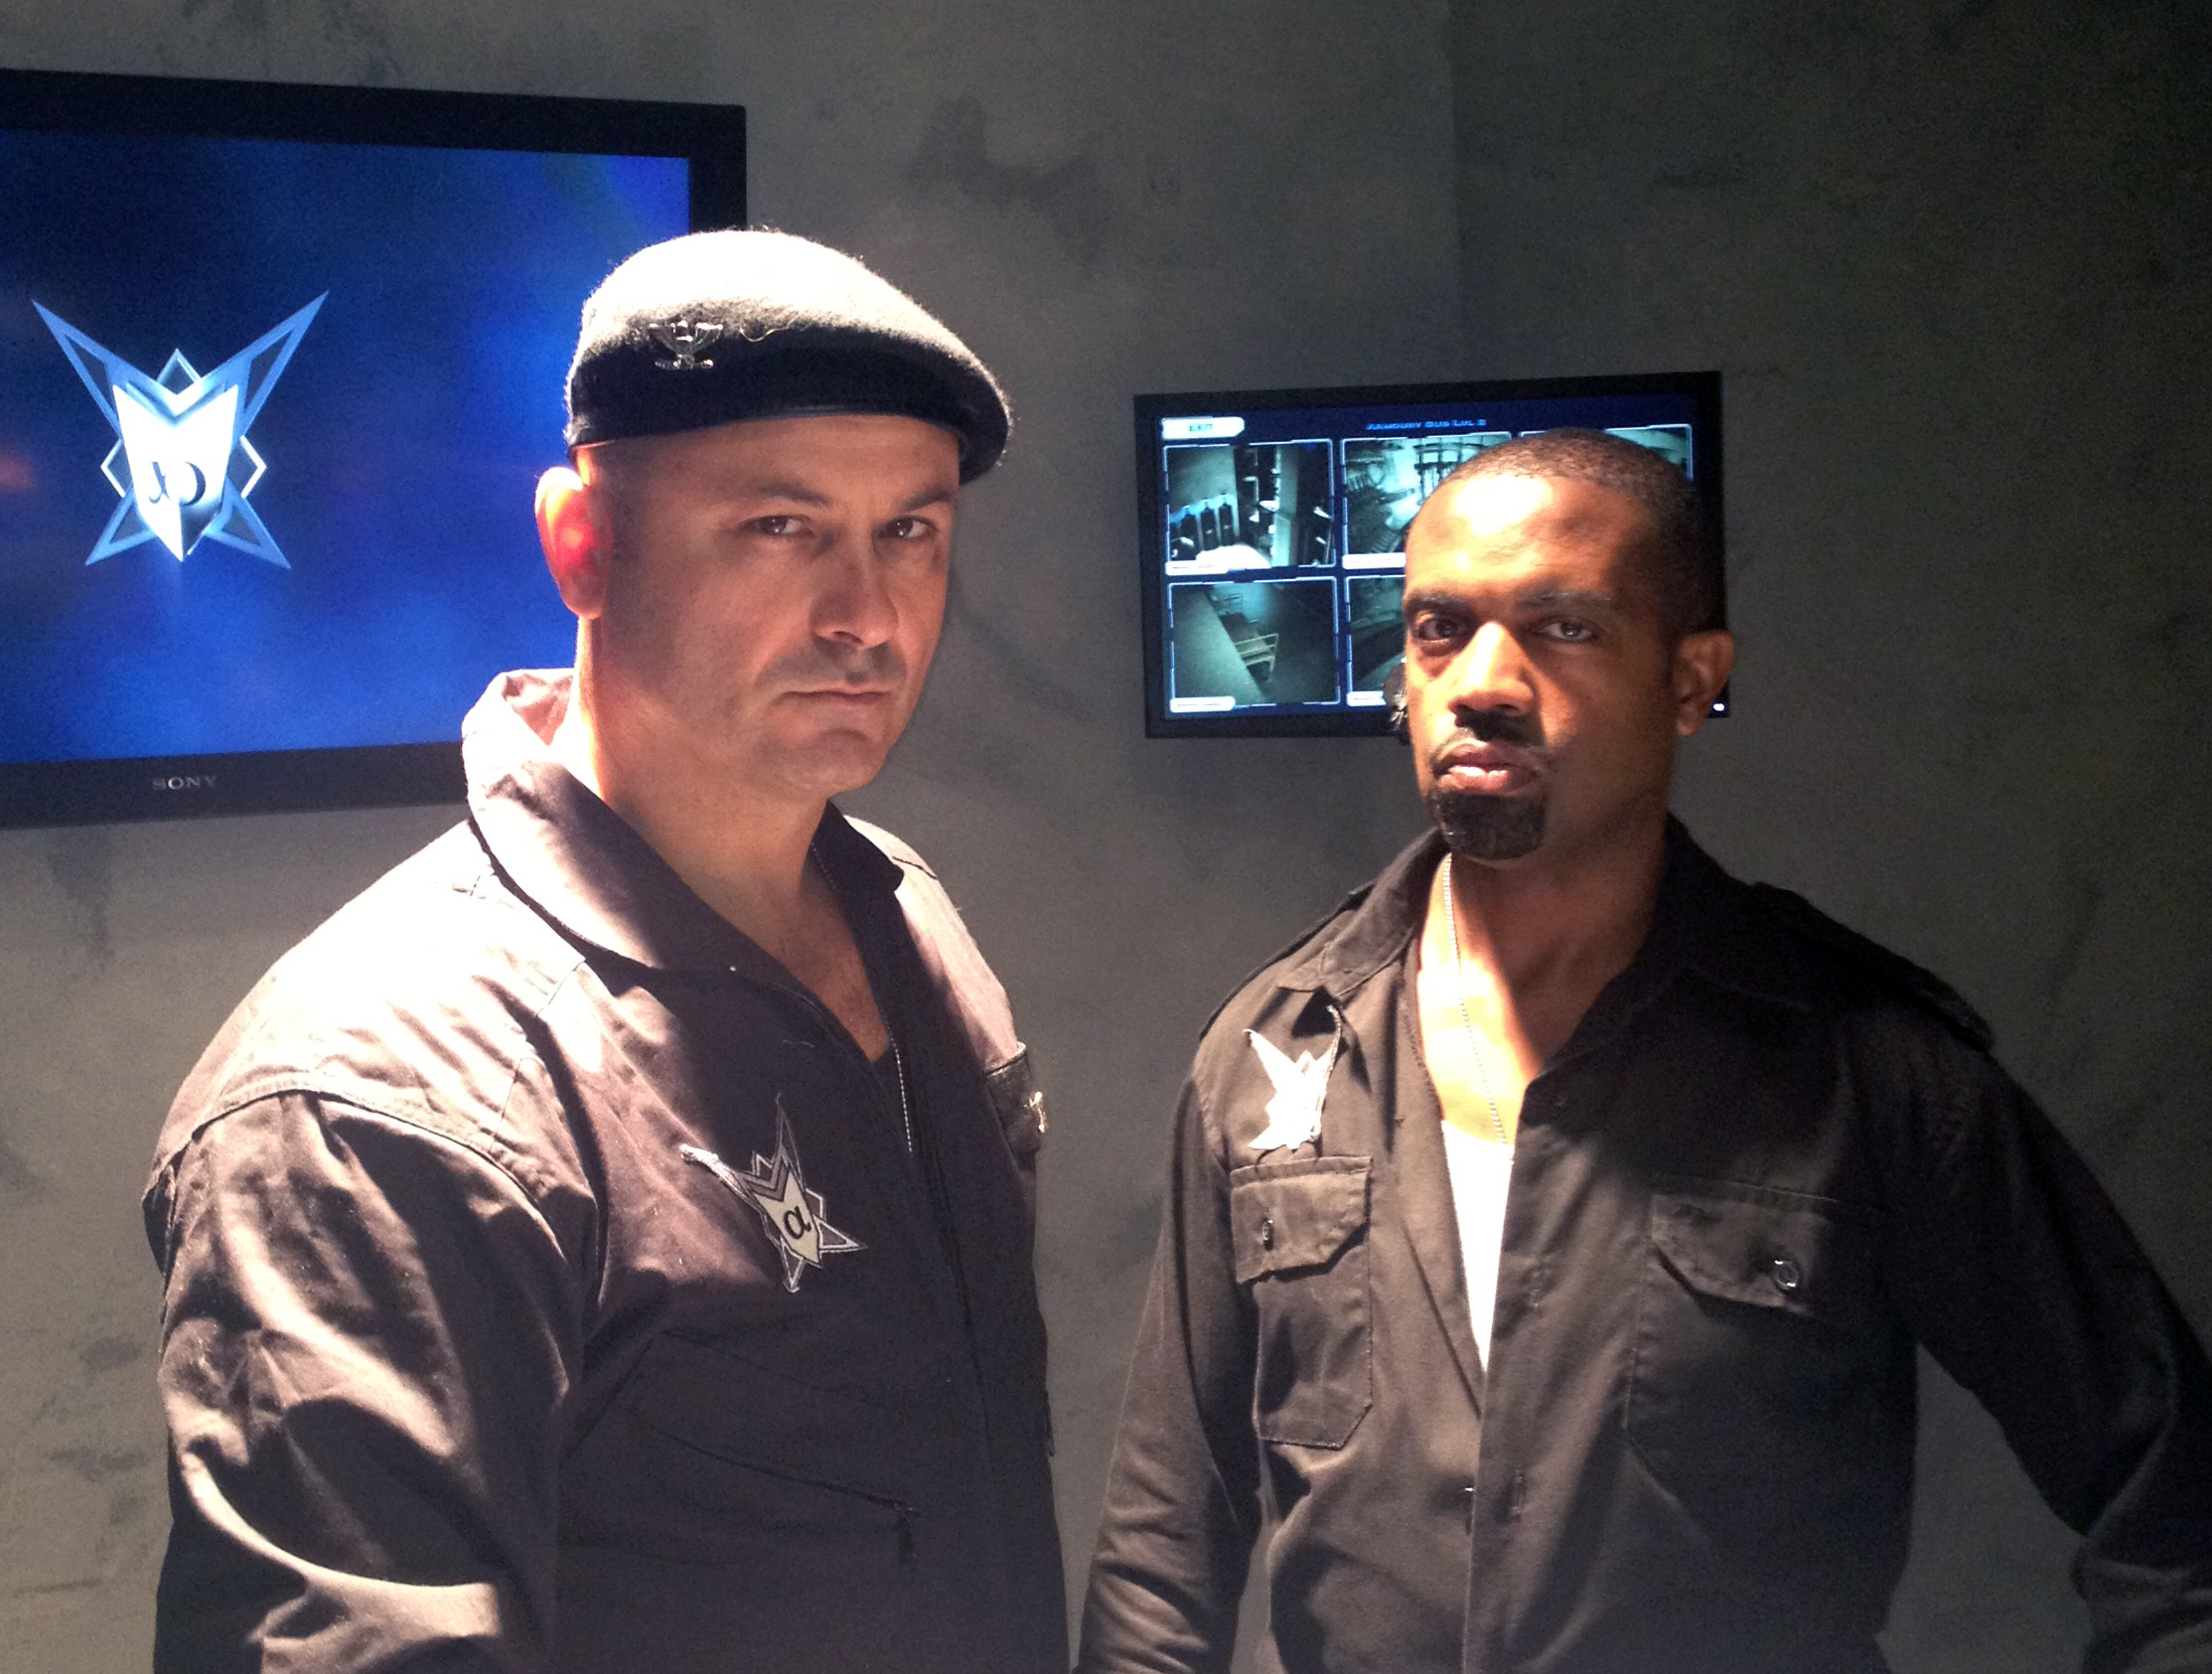 On the set of the upcoming Sci-fi action film The Half Dead with Steve Bastoni.